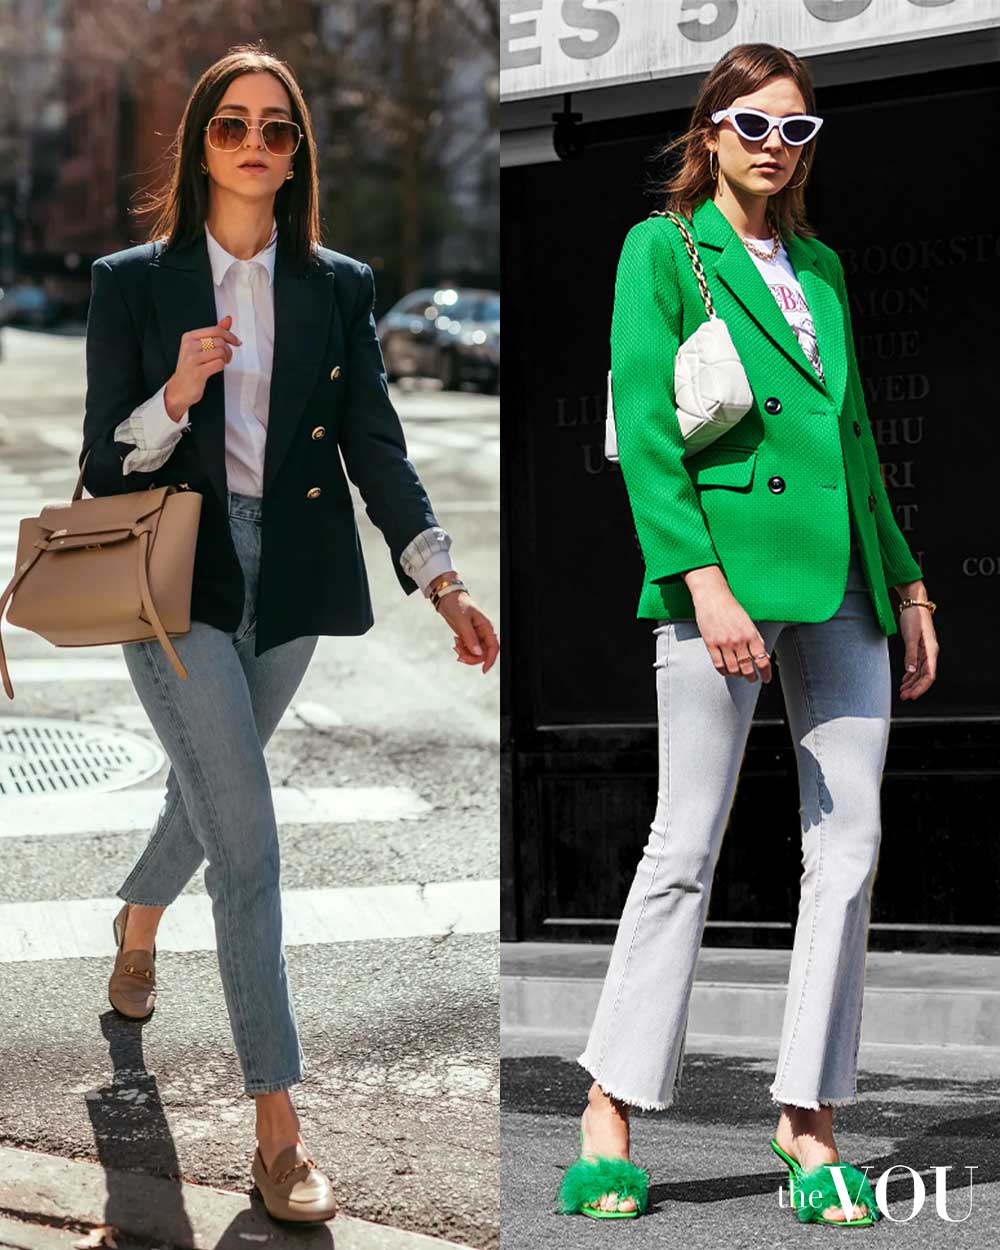 Tailor-fit Blazer With Neutral Jeans